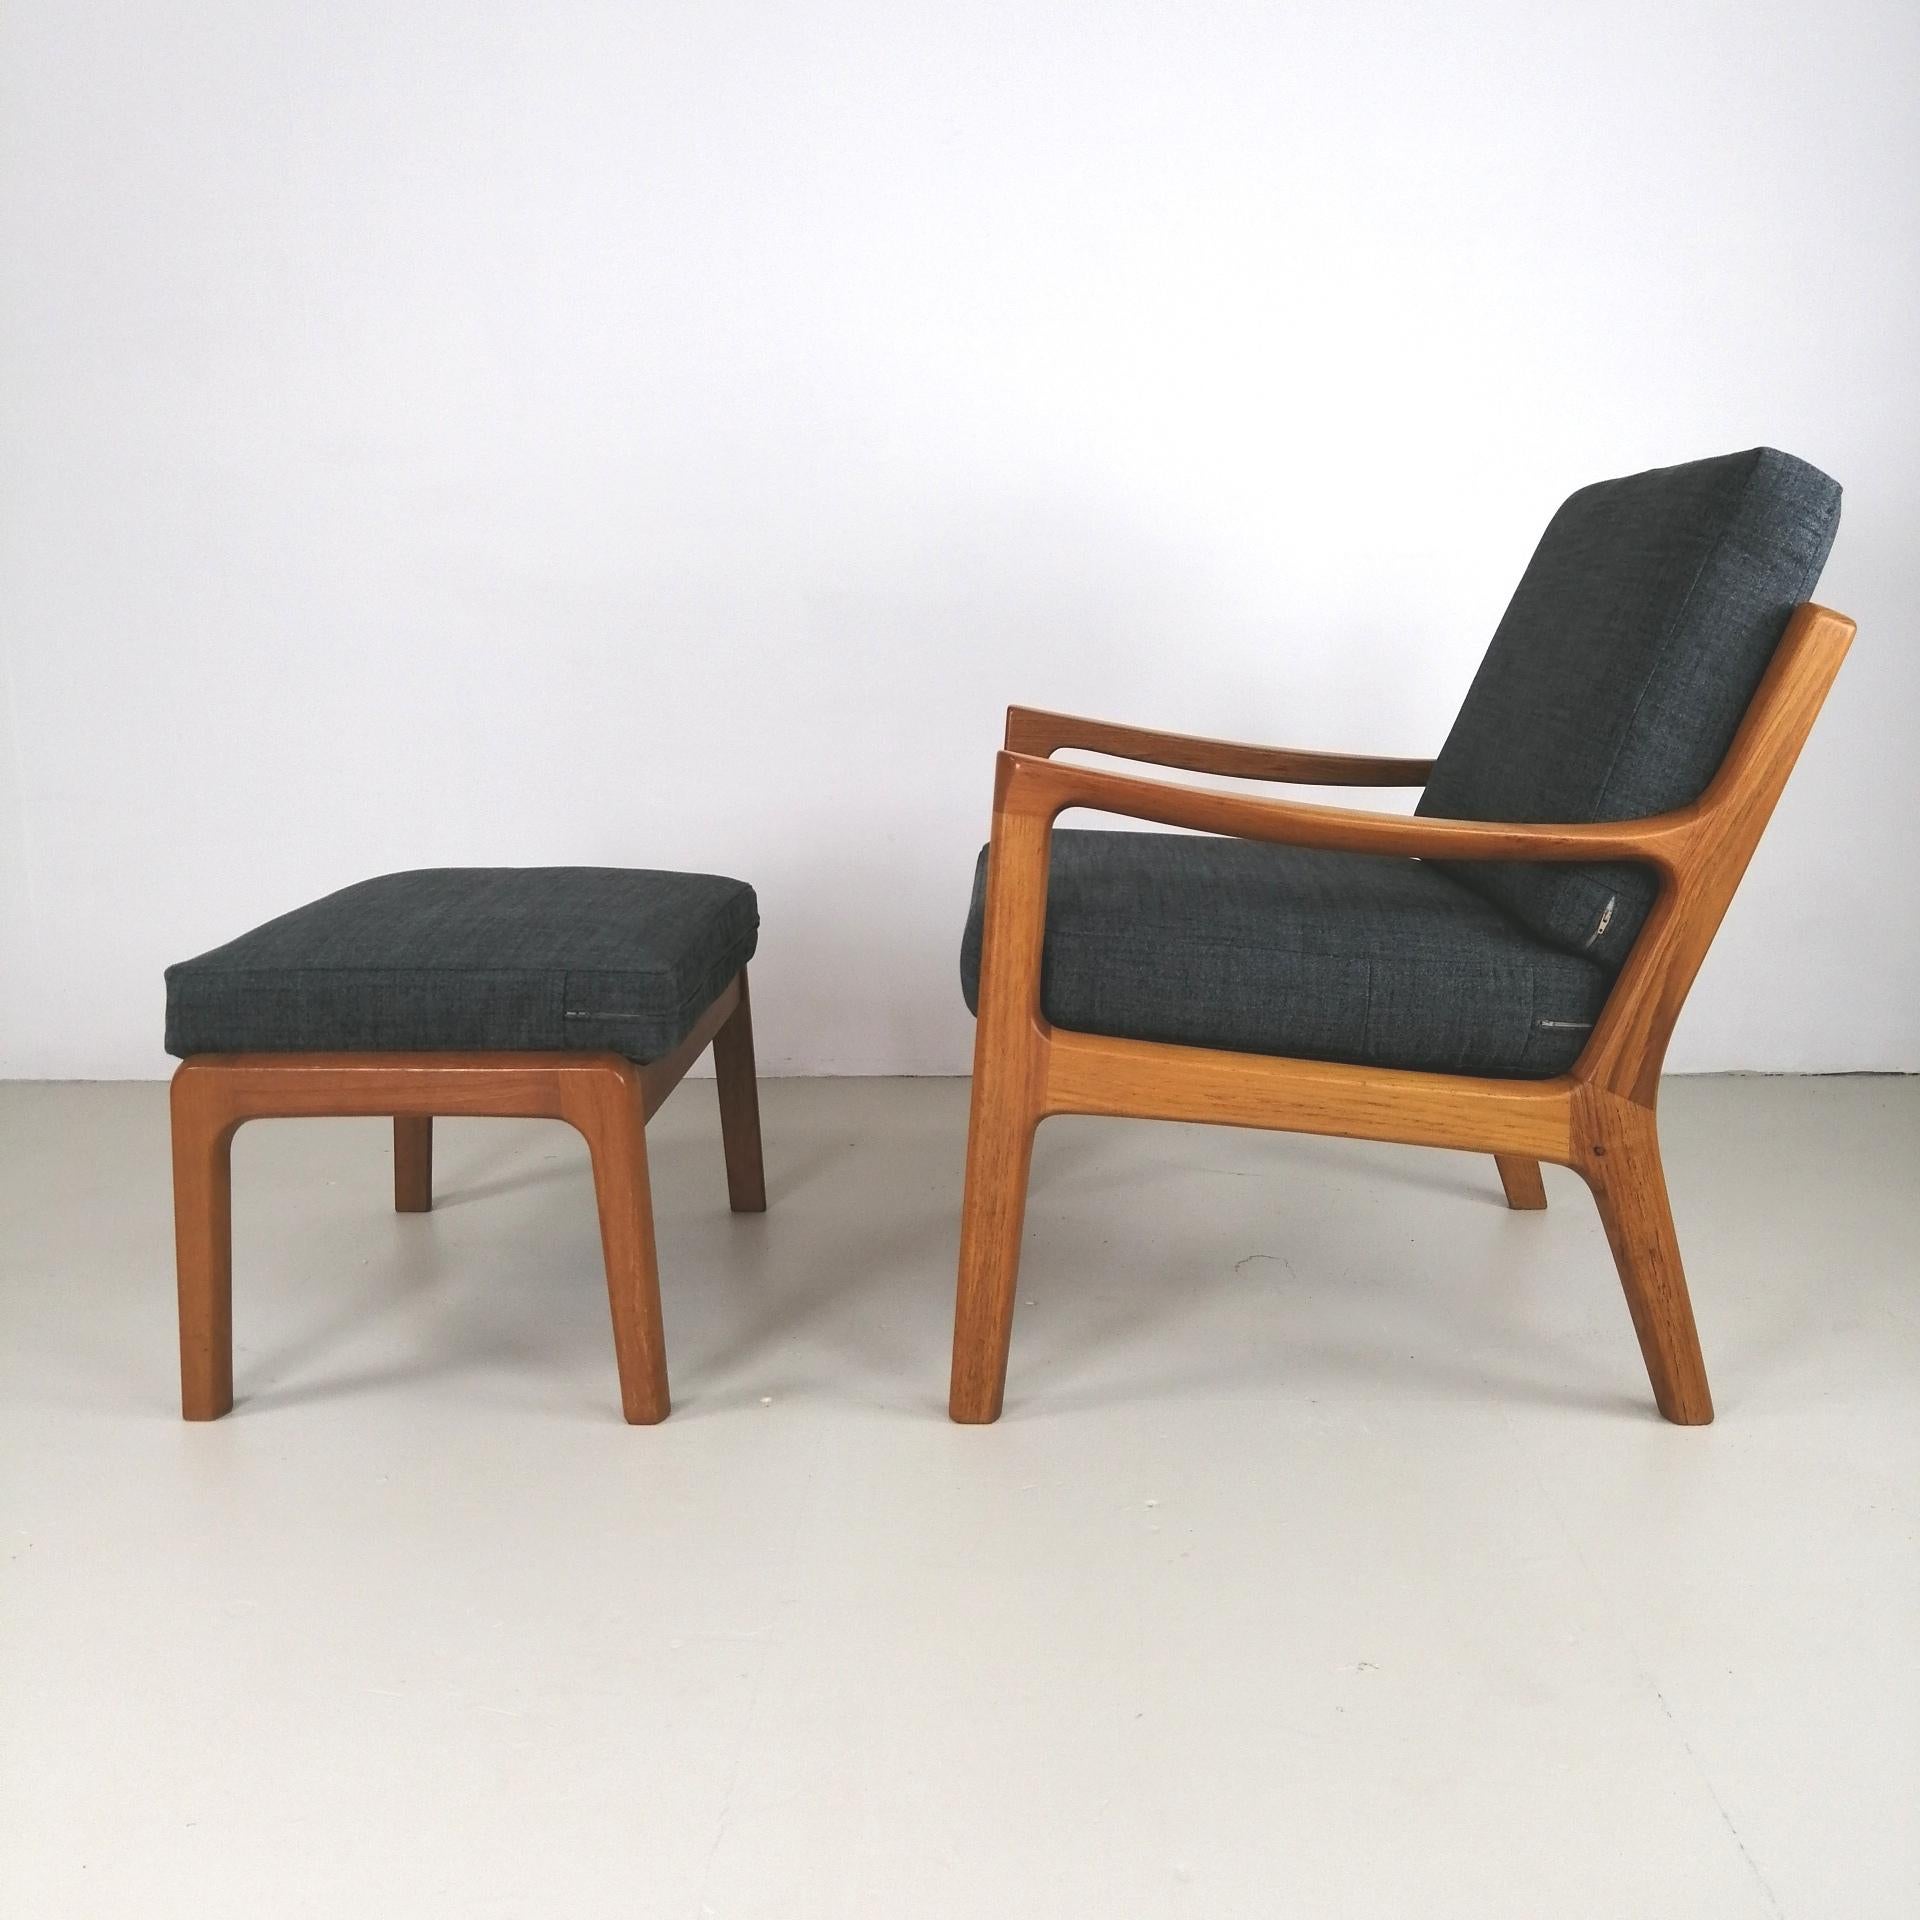 20th Century Ole Wanscher 1960s Teak Lounge Chair with Matching Ottoman, Grey Upholstery